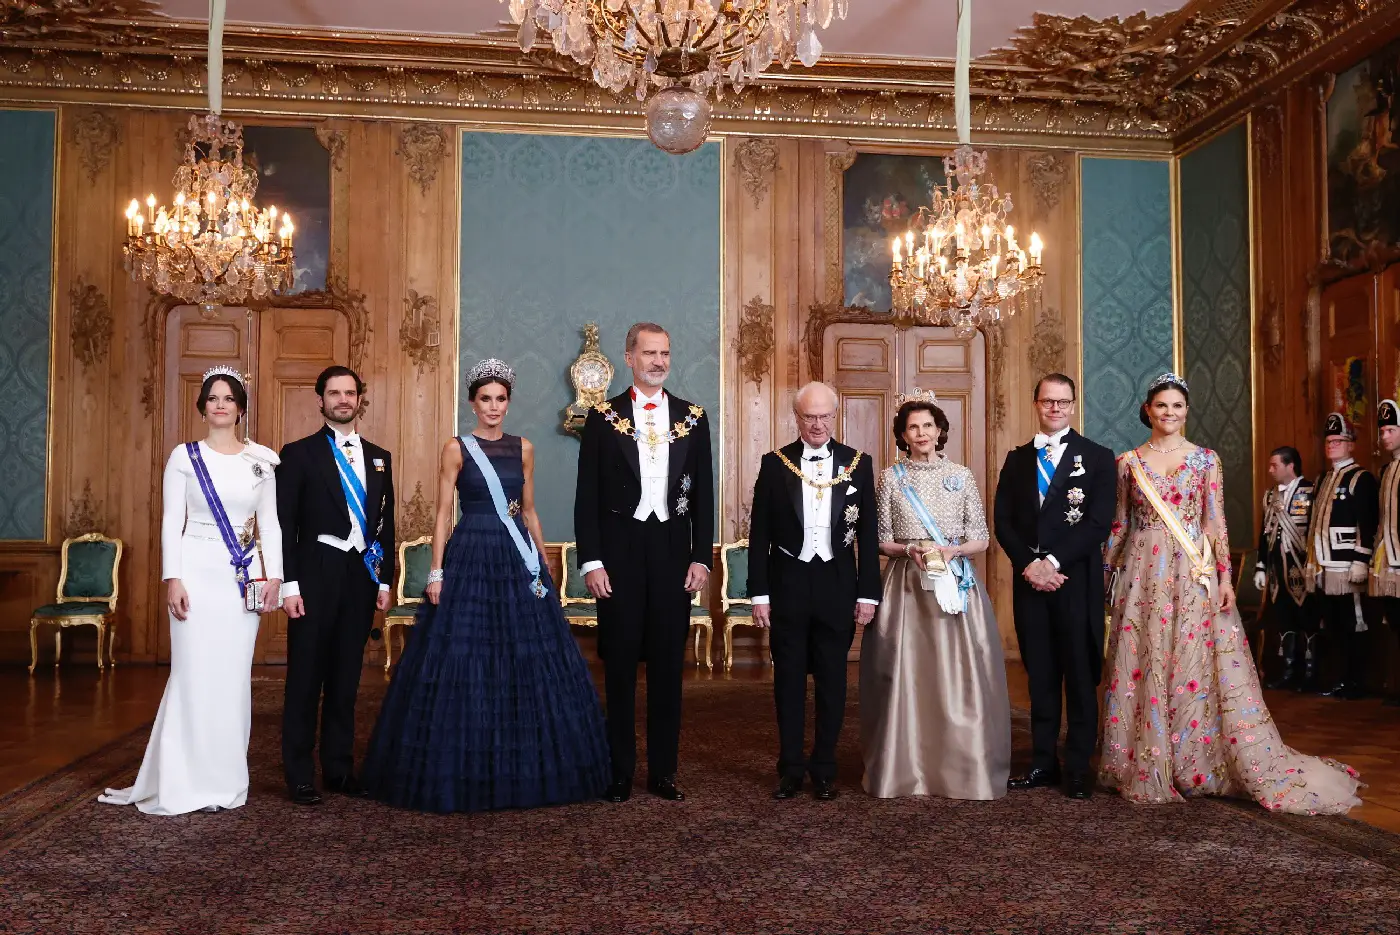 They were joined by Crown Princess Victoria and her husband Prince Daniel, Prince Carl Philip and his wife Princess Sofia for the dazzling night